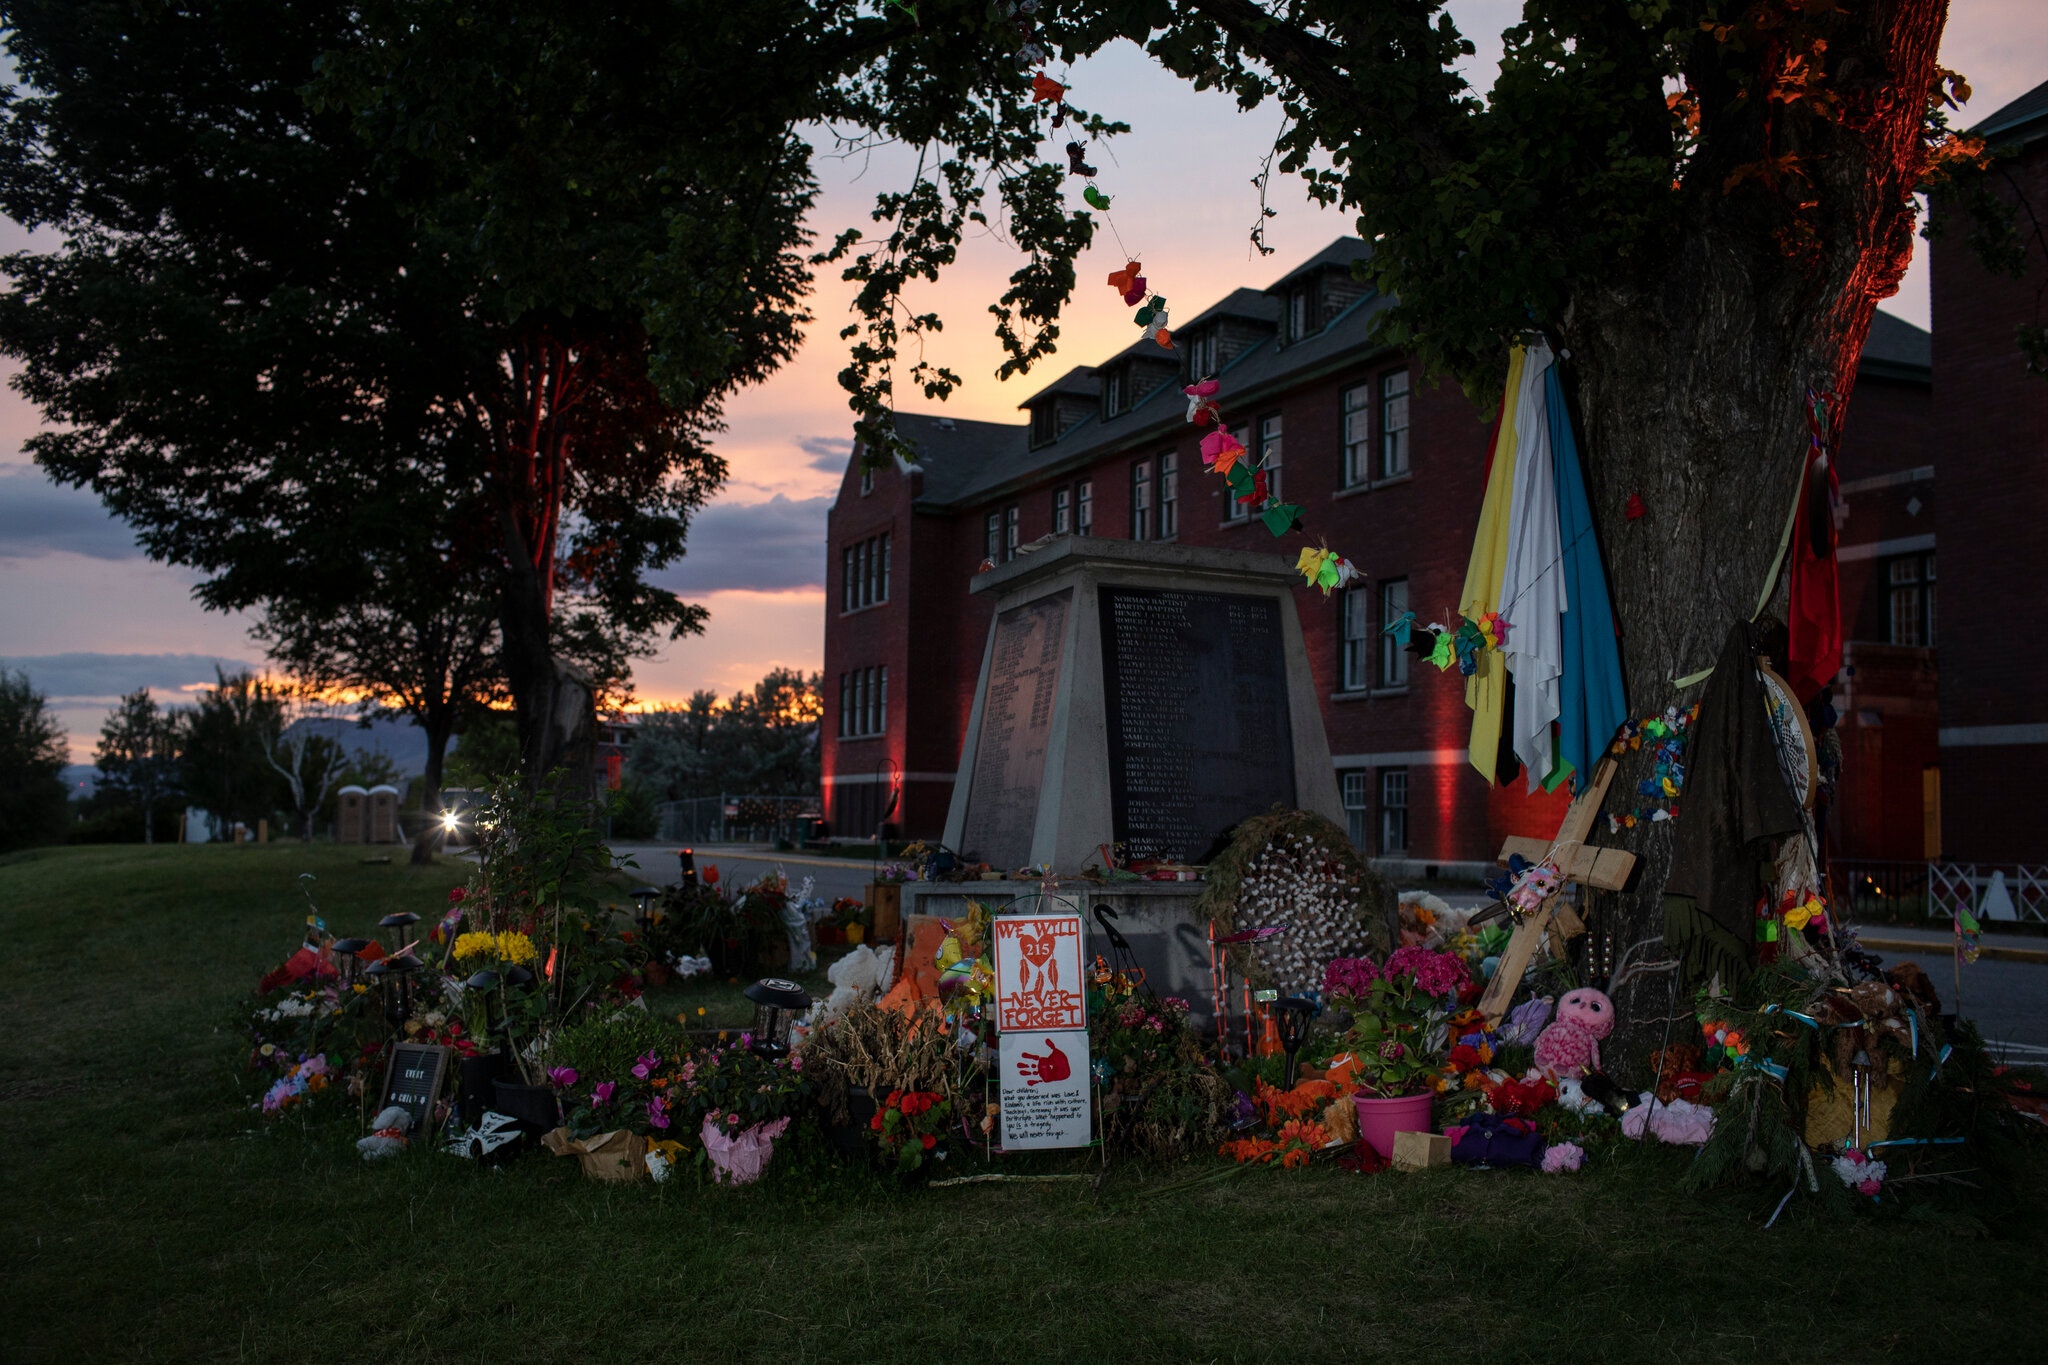 A memorial set up after the discovery of 215 unmarked graves at a former boarding school in British Columbia.Credit...Amber Bracken for The New York Times